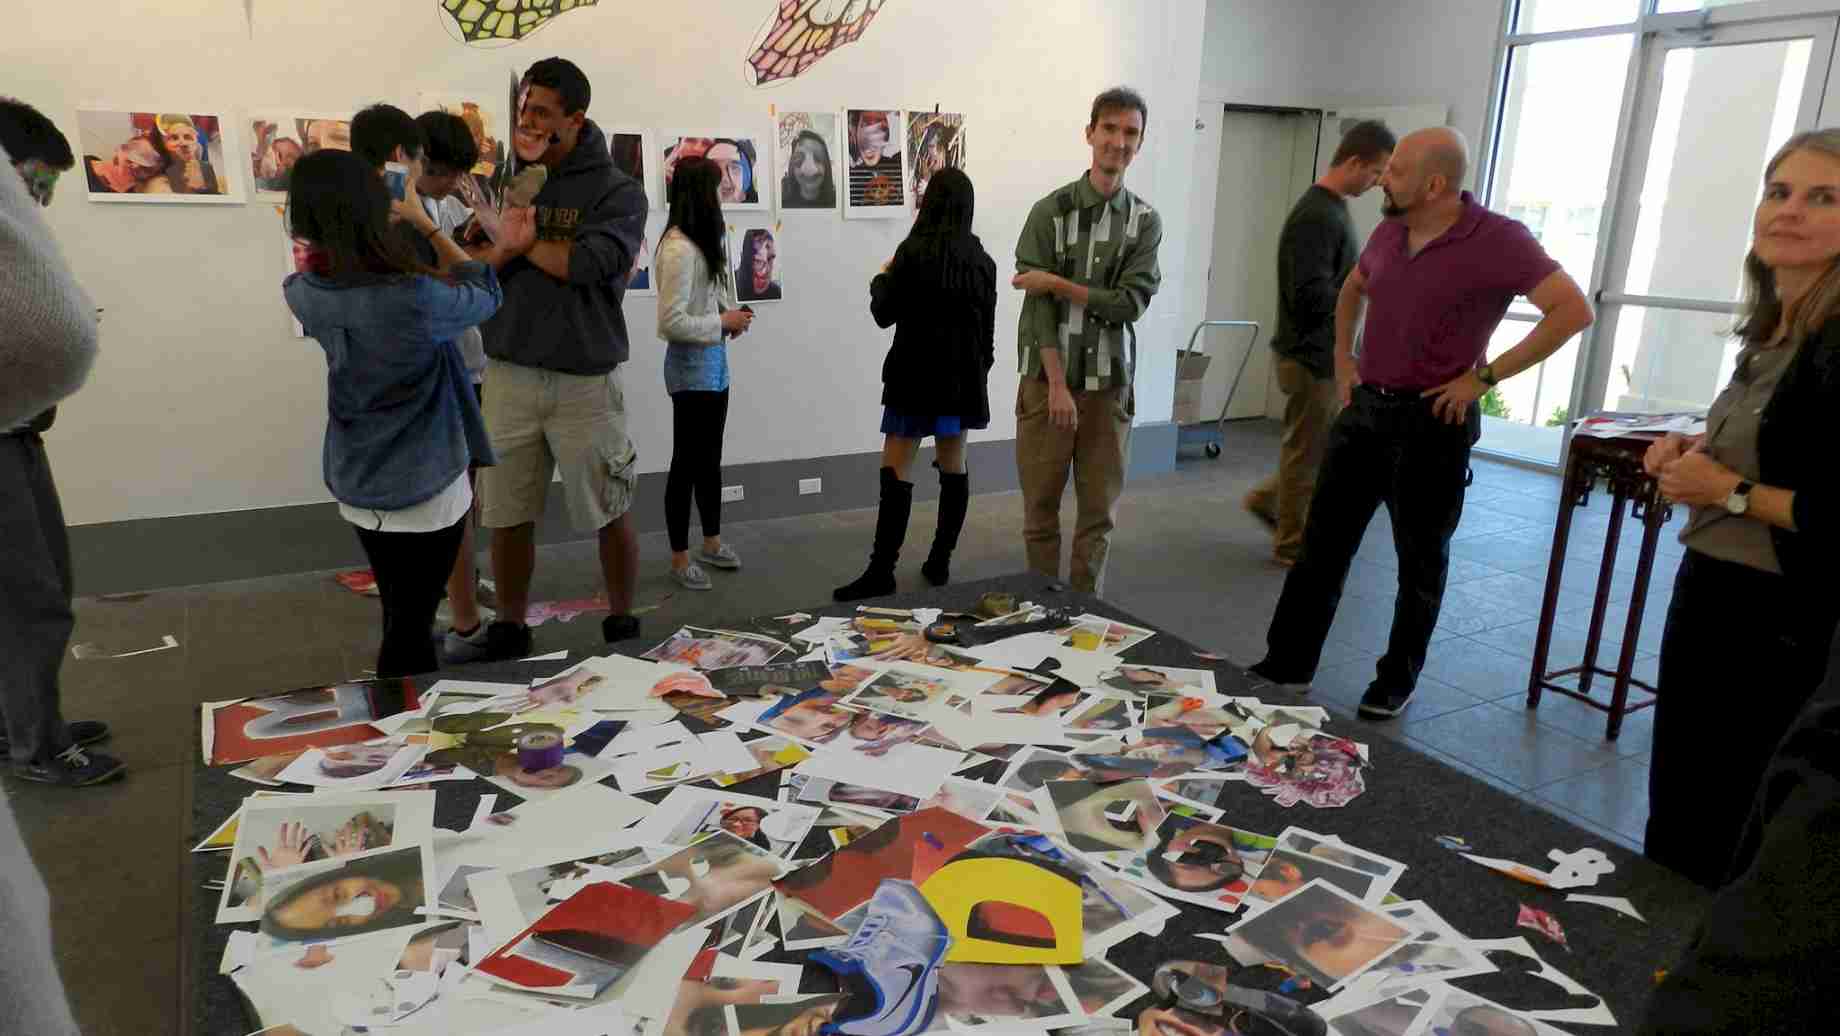 In 2013, UF art education students collaborated with contemporary artist Oliver Herring and students at Oak Hall School in Gainesville.